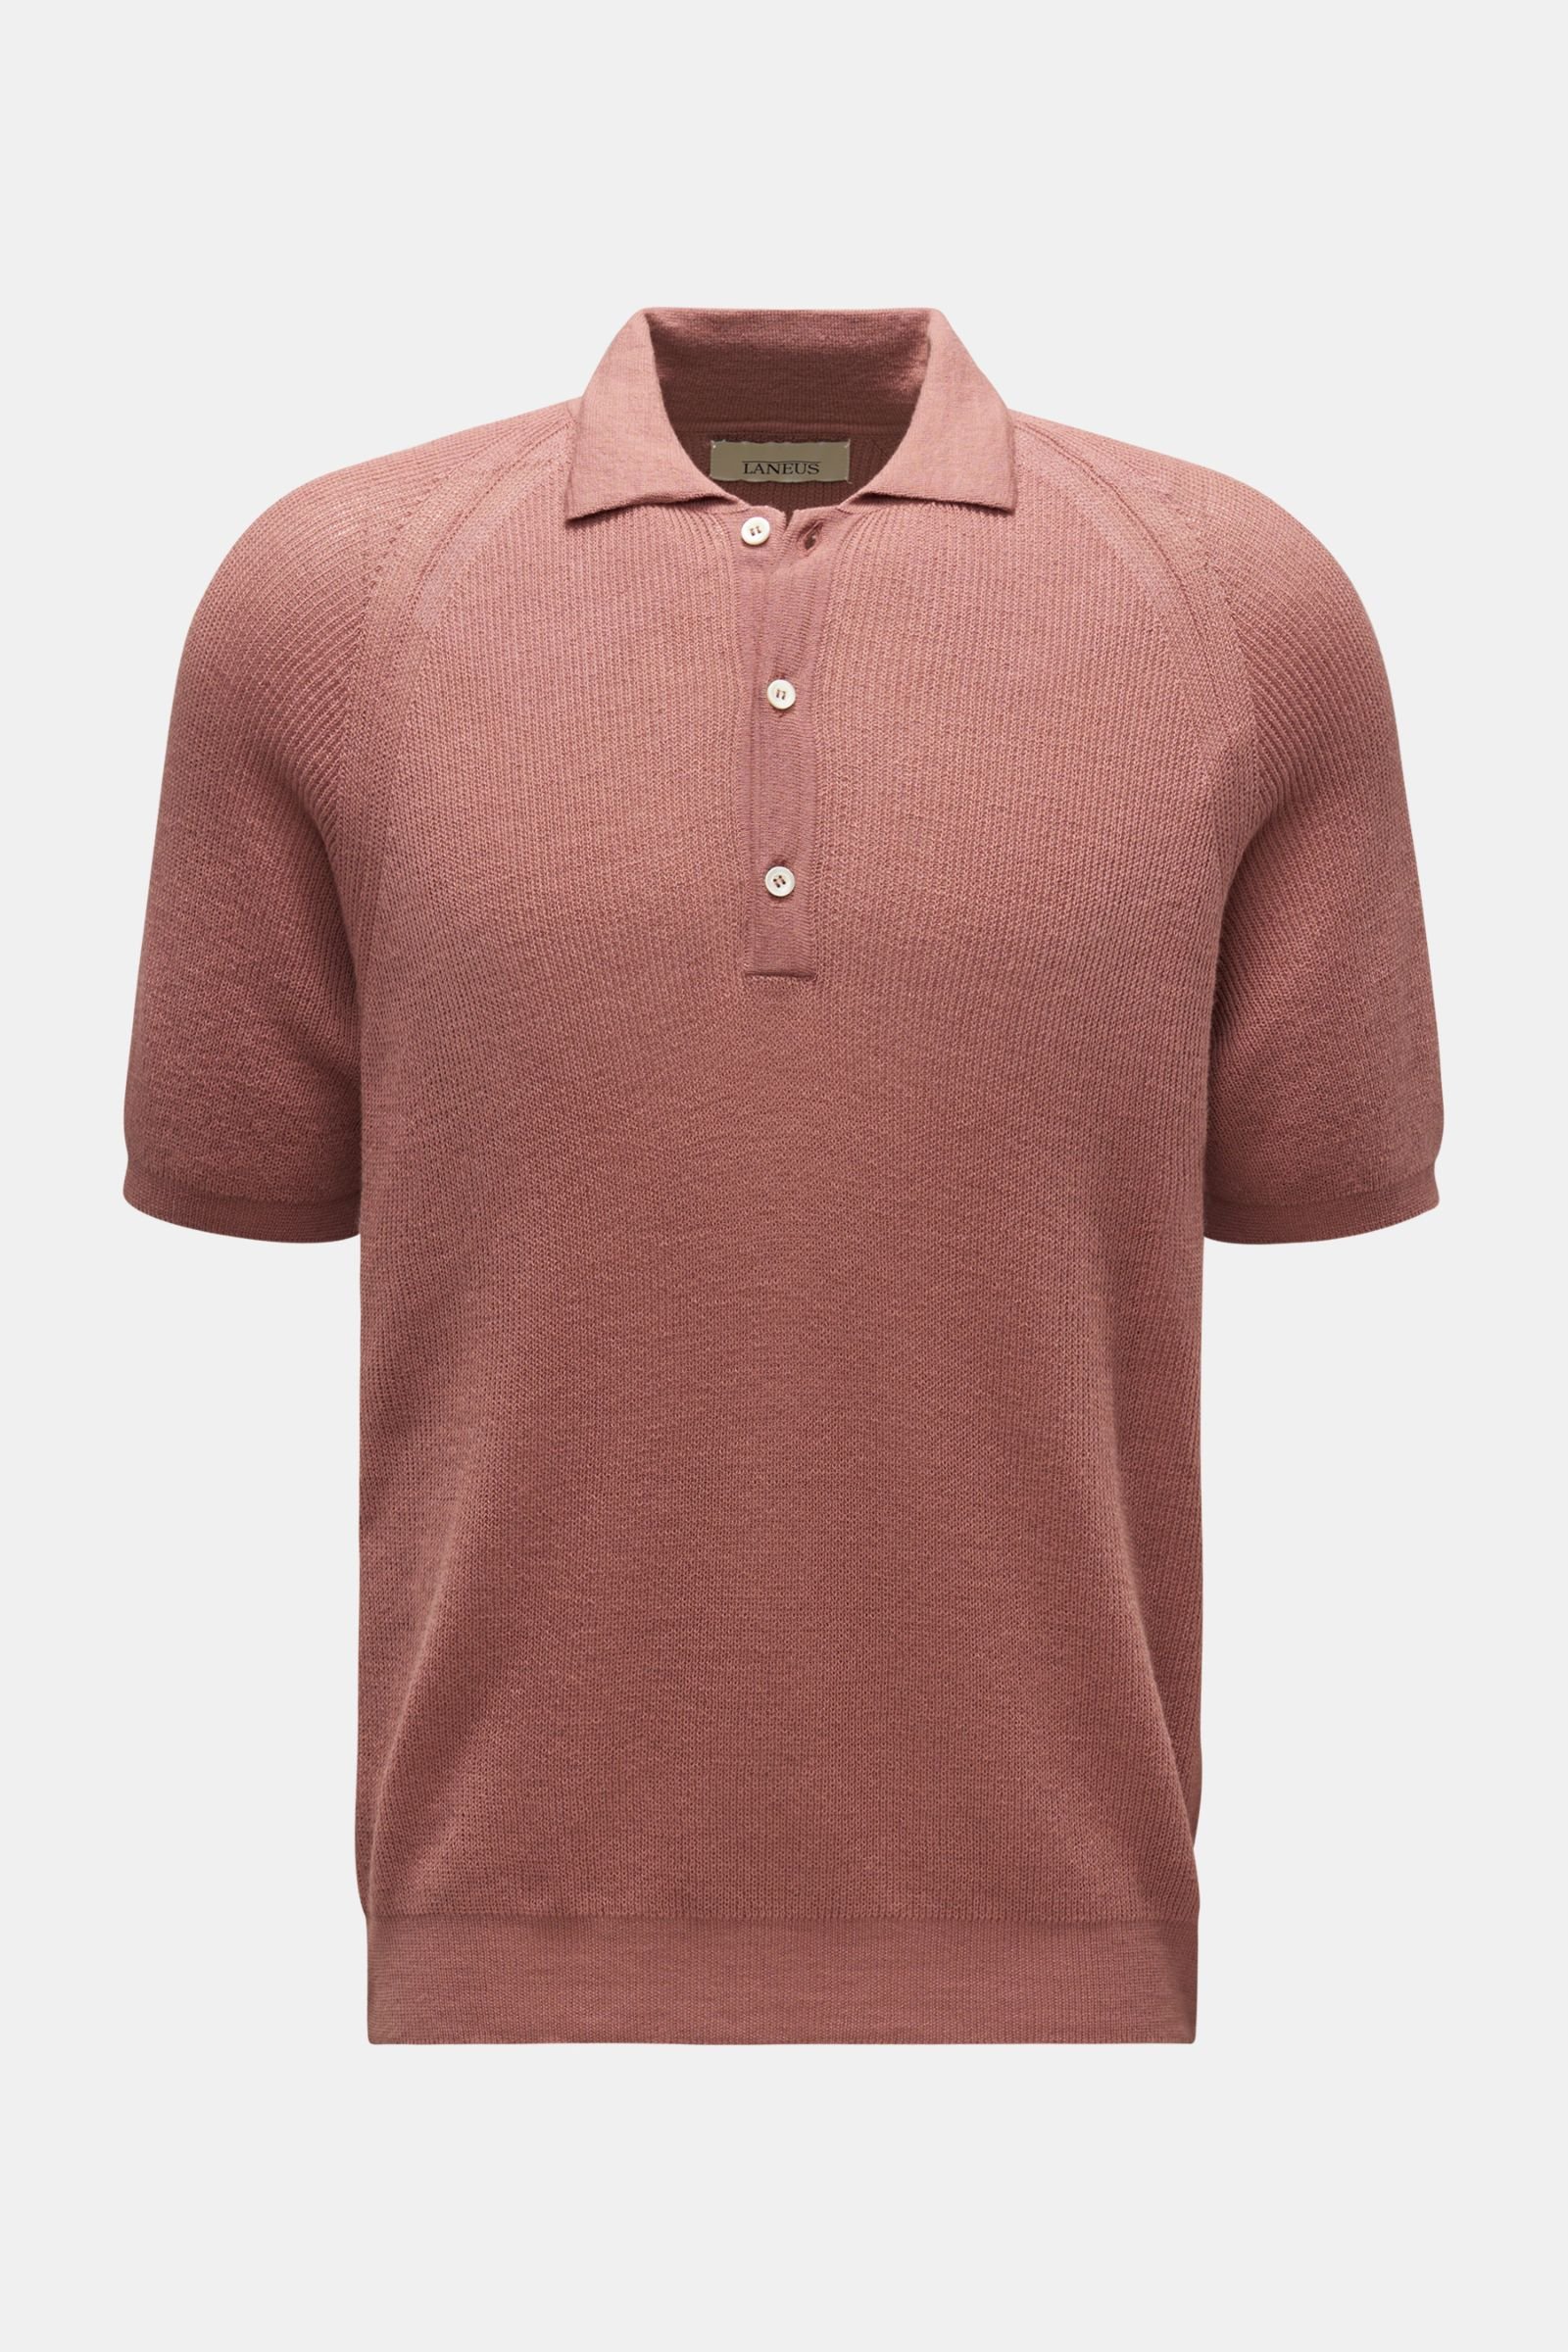 Short sleeve knit polo red brown